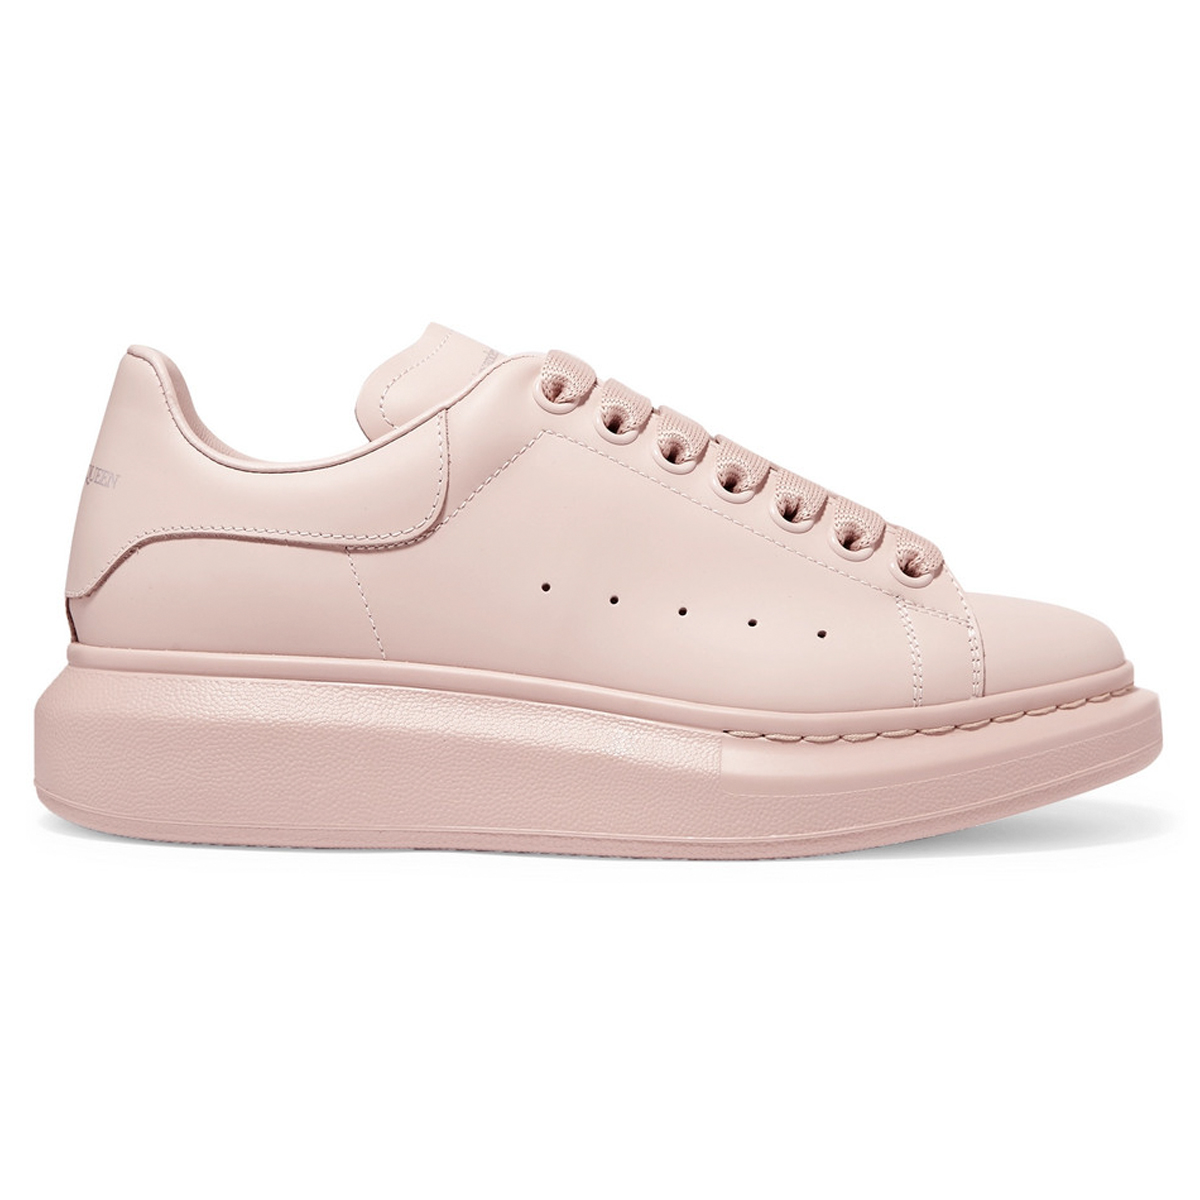 most popular shoes 2019 women's